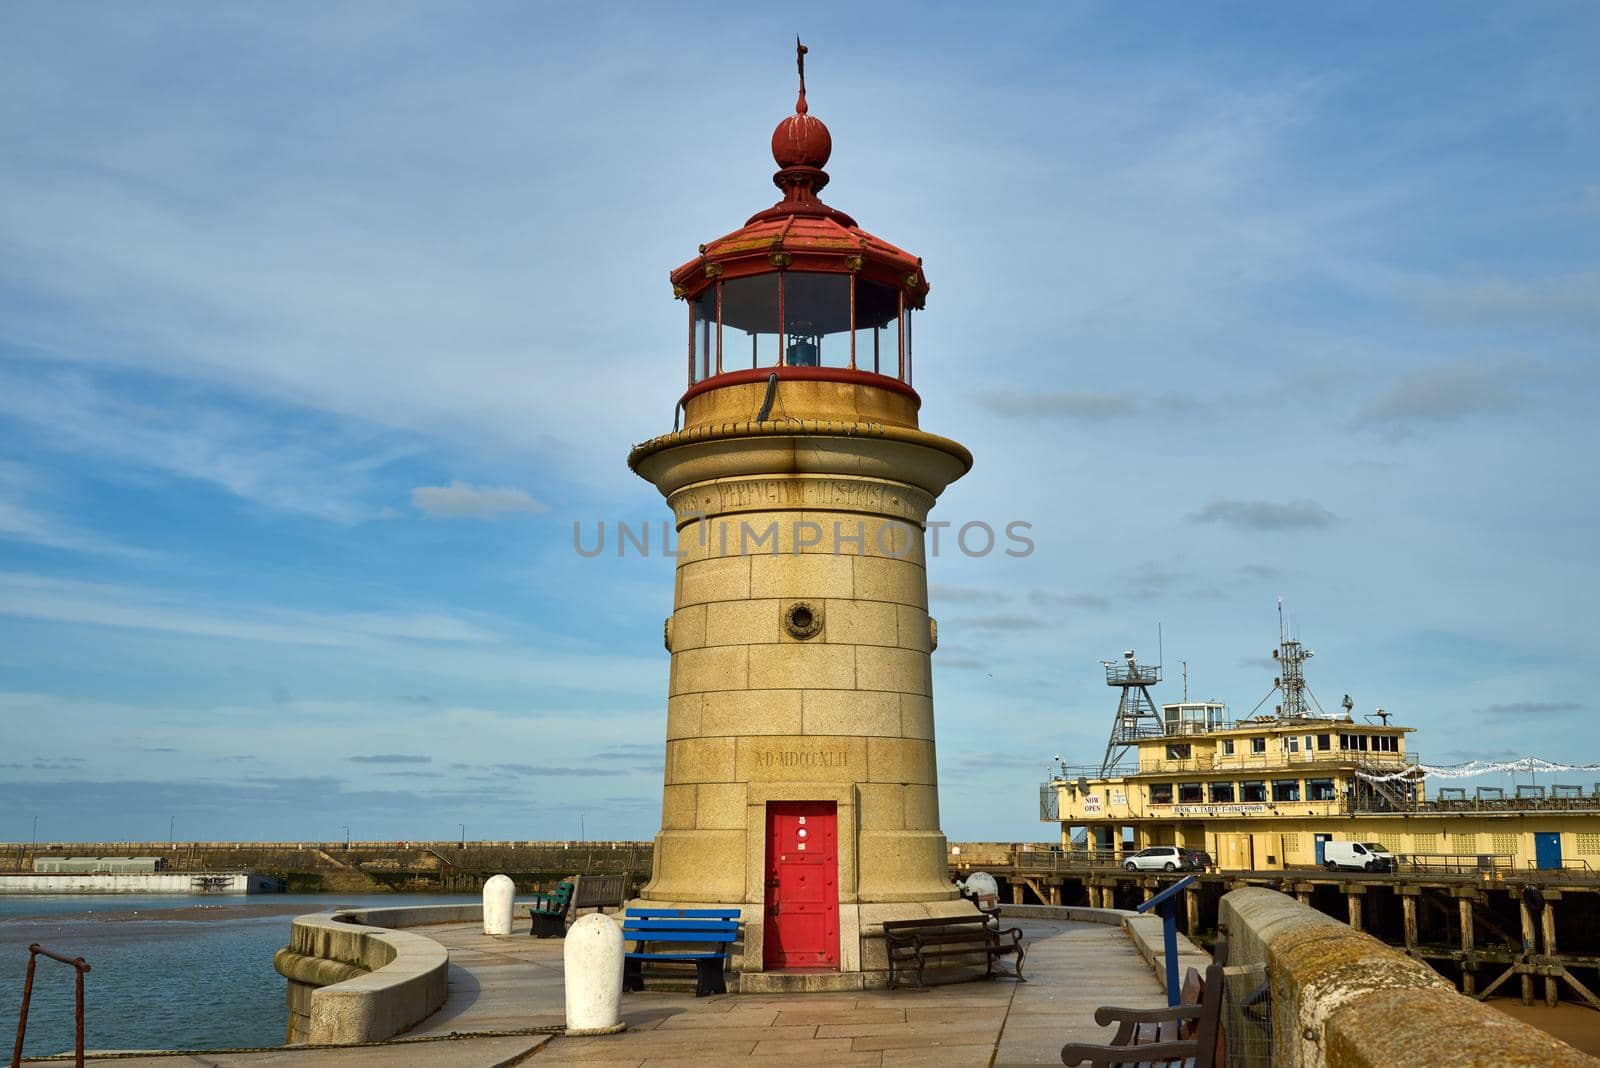 The granite lighthouse was built in 1842 by John Shaw according to John Smeaton's design. The lighthouse stands on the West Pier of the Royal Harbour with the words perfugium miseris carved into the stone, translates to Refuge for the Unfortunate.